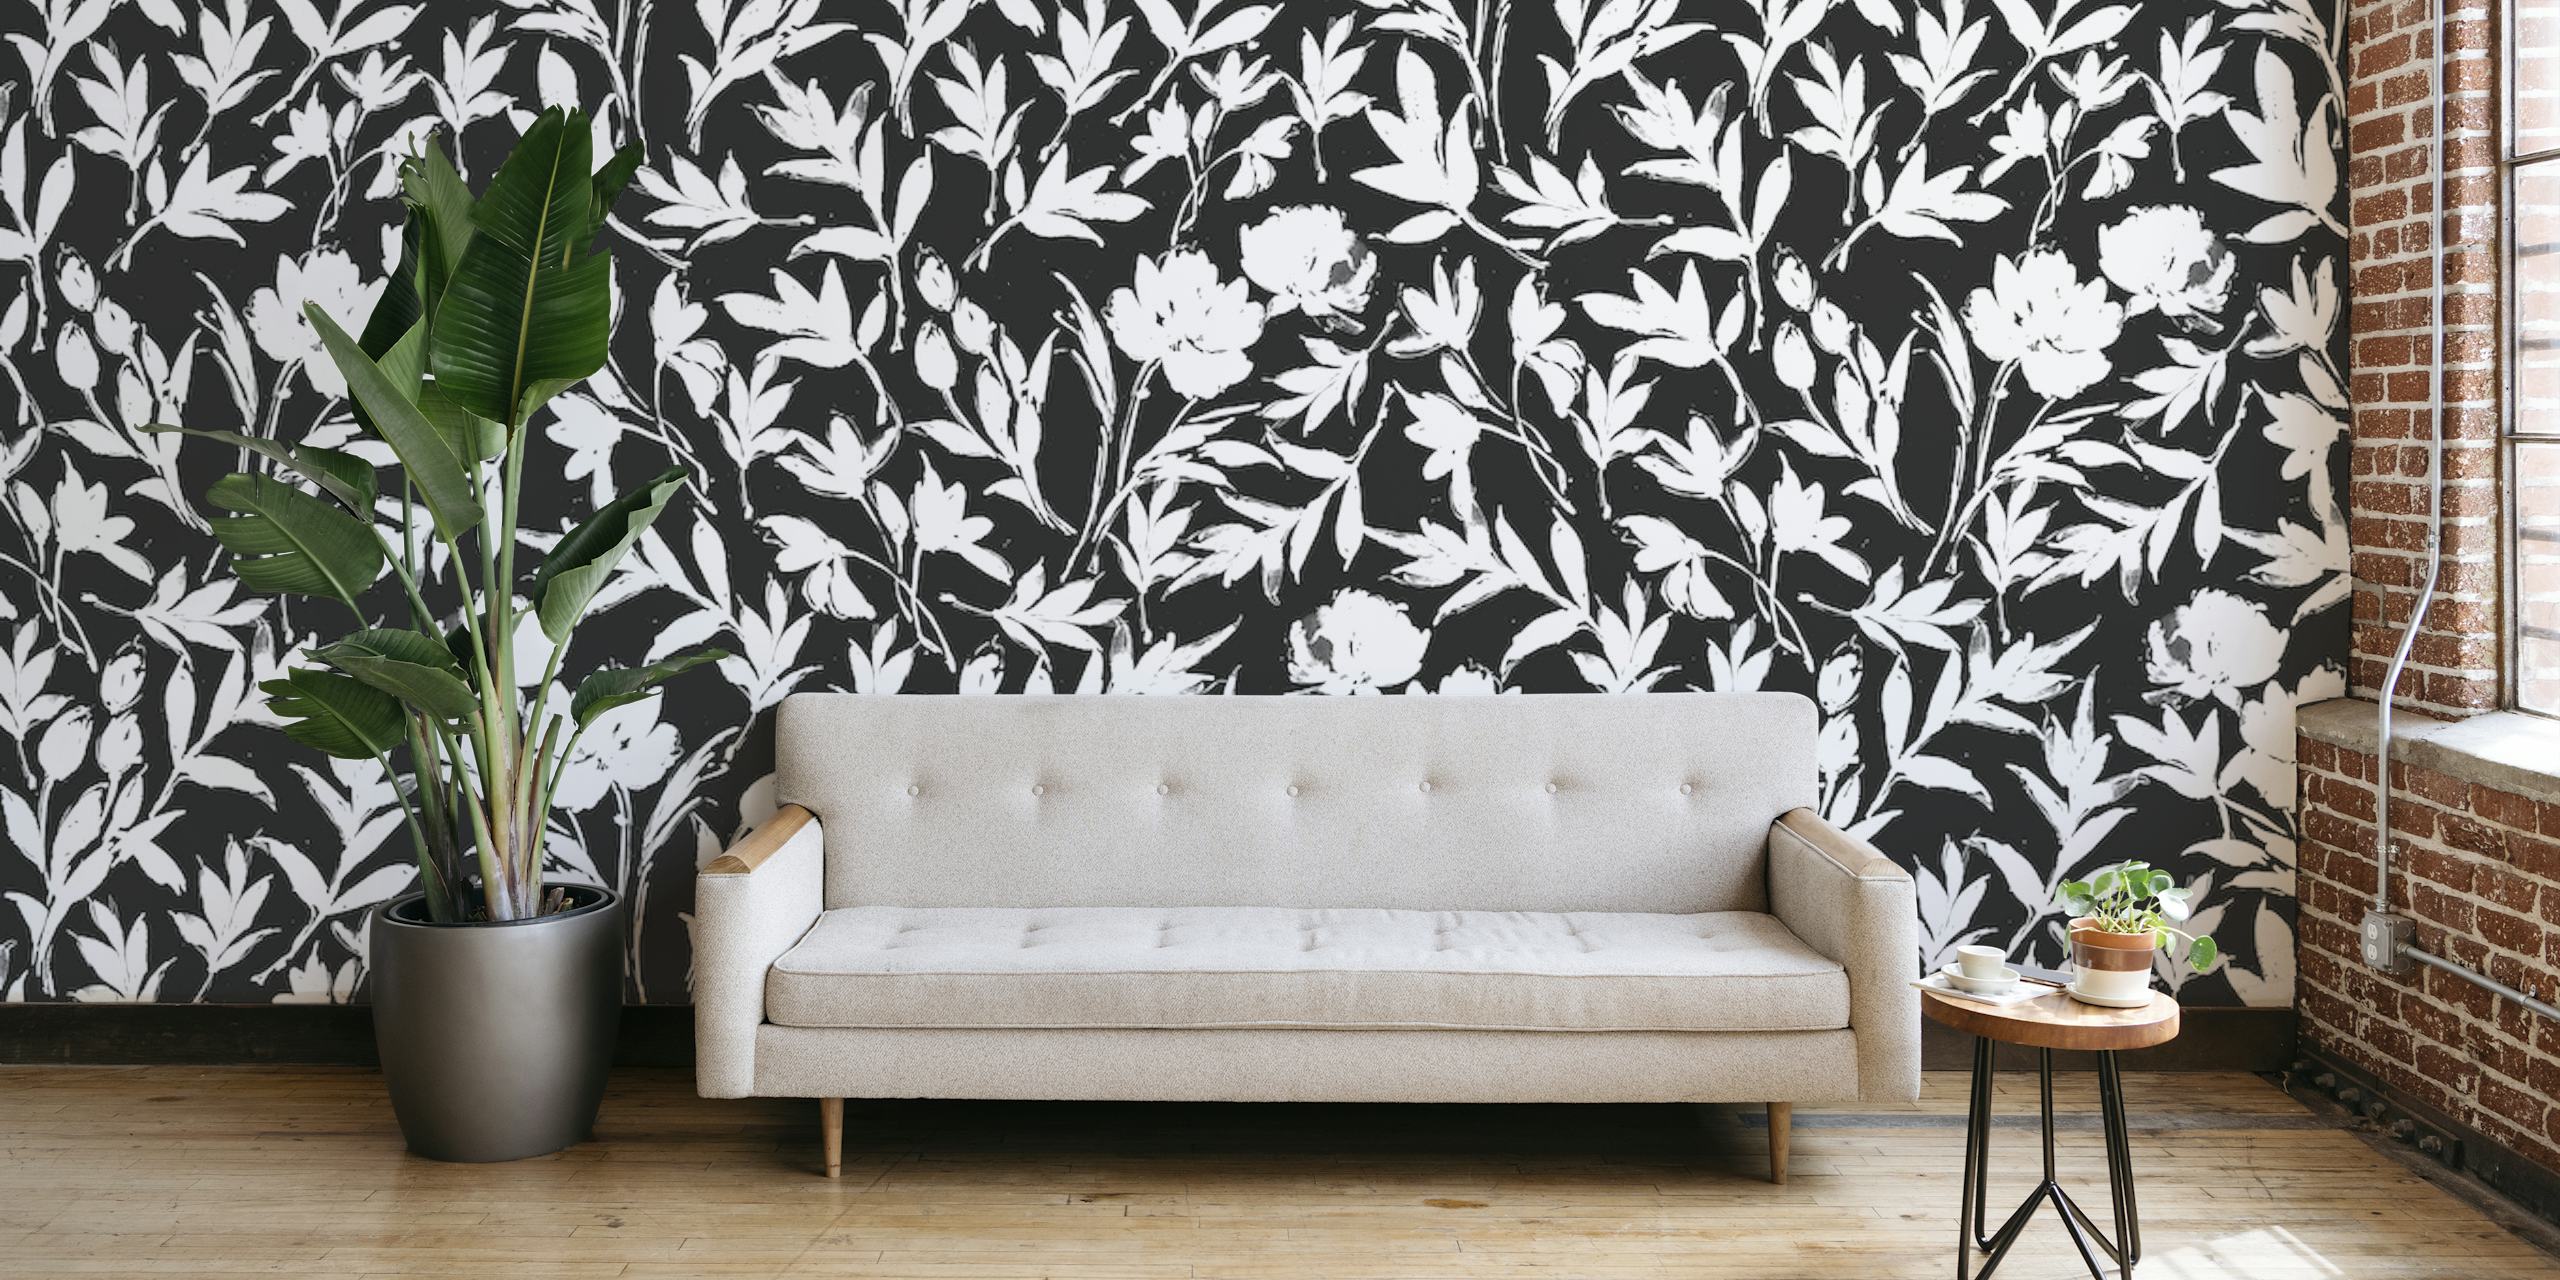 Black and white floral garden wall mural with intricate botanical patterns